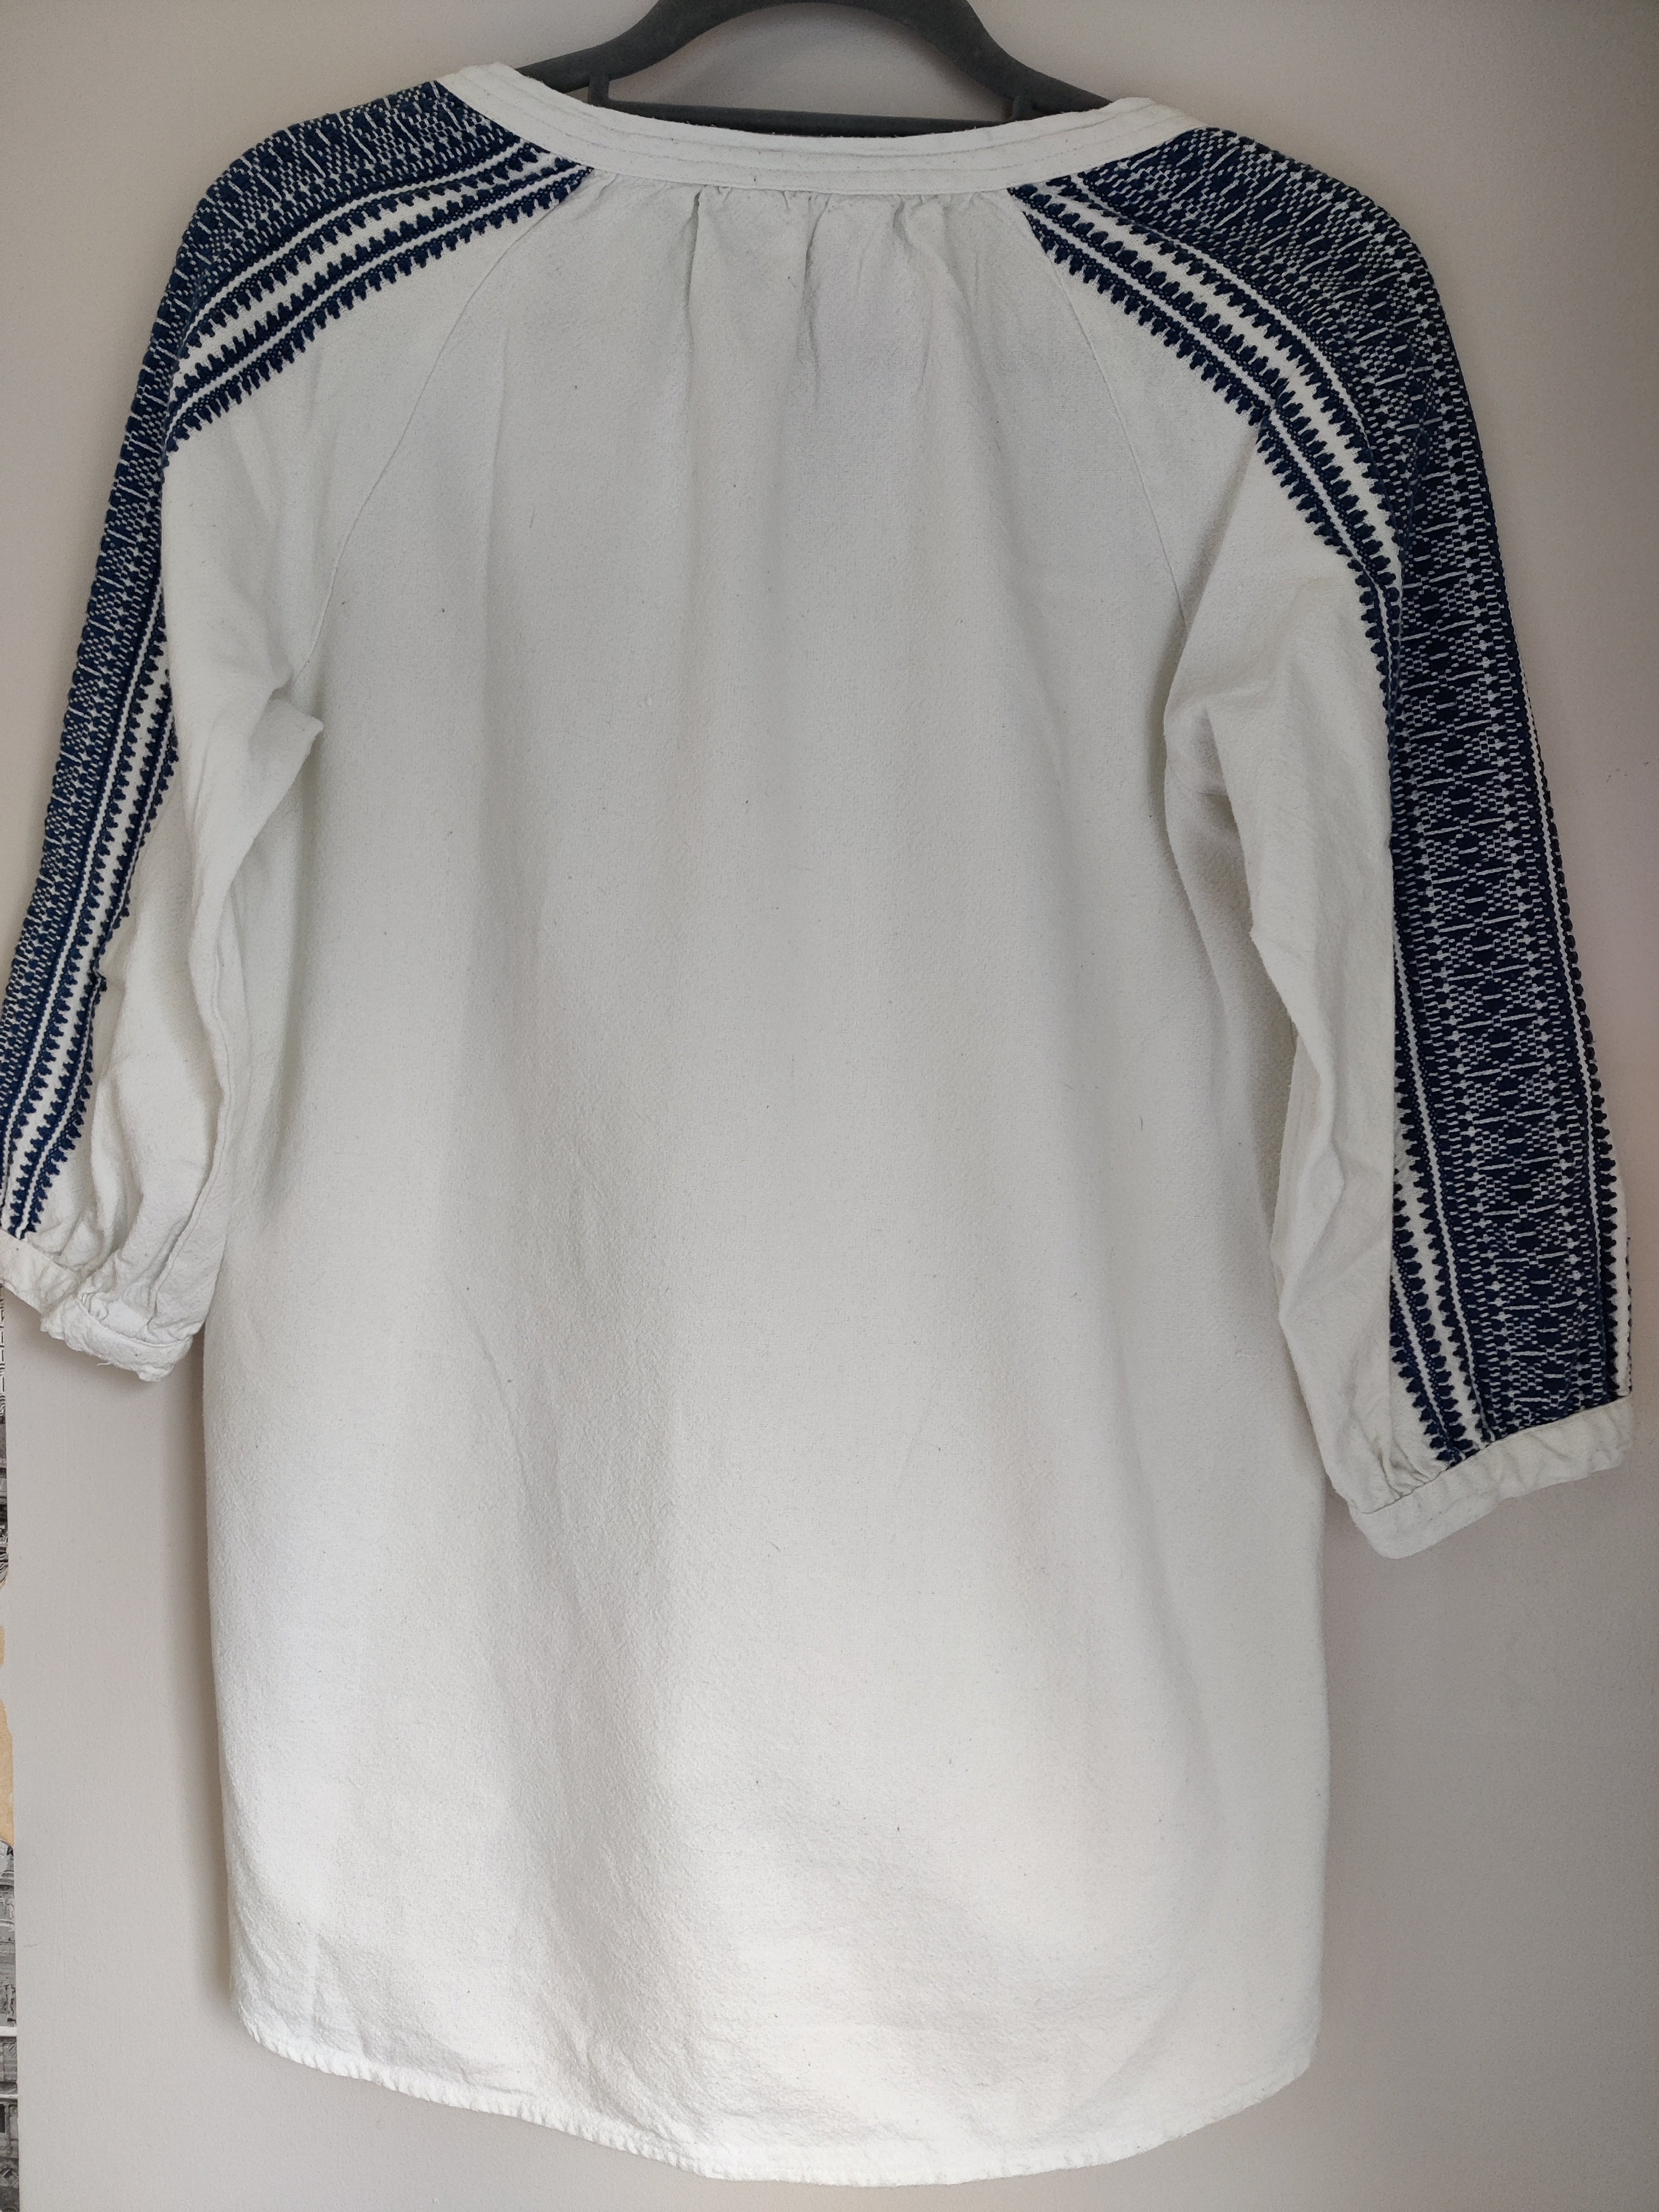 Preloved Embroidered white top